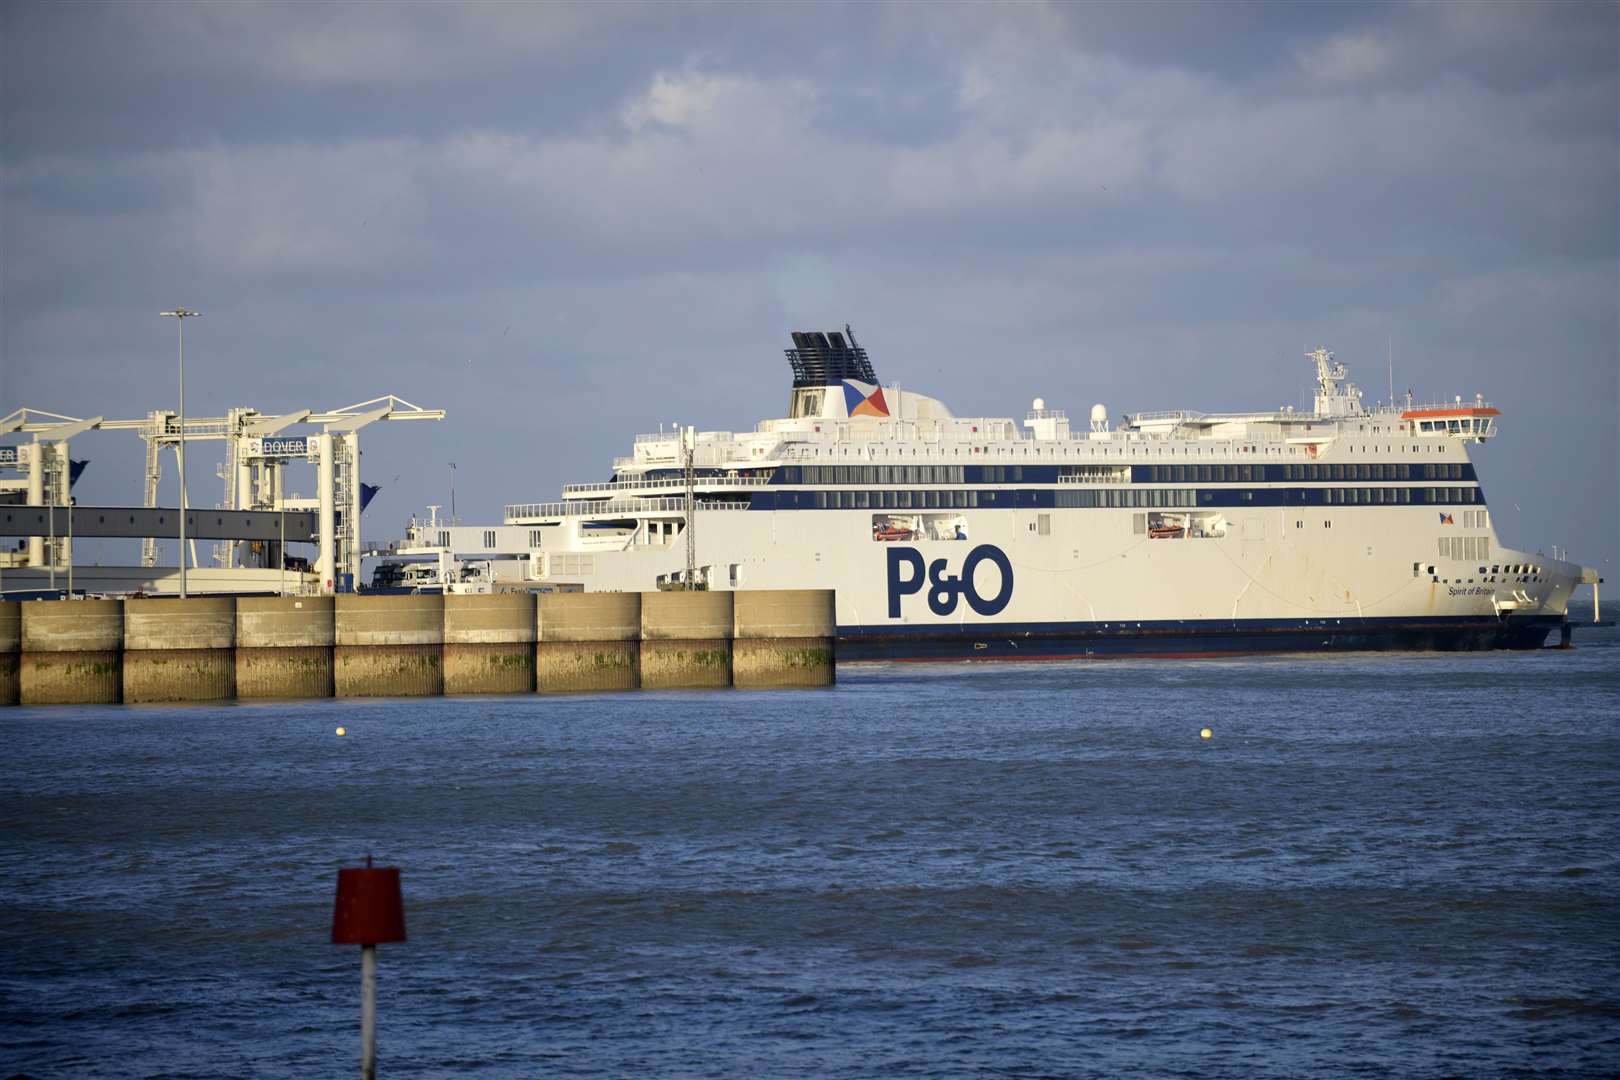 P&O Ferries will now be led by acting chief executive David Stretch, the company's former managing director